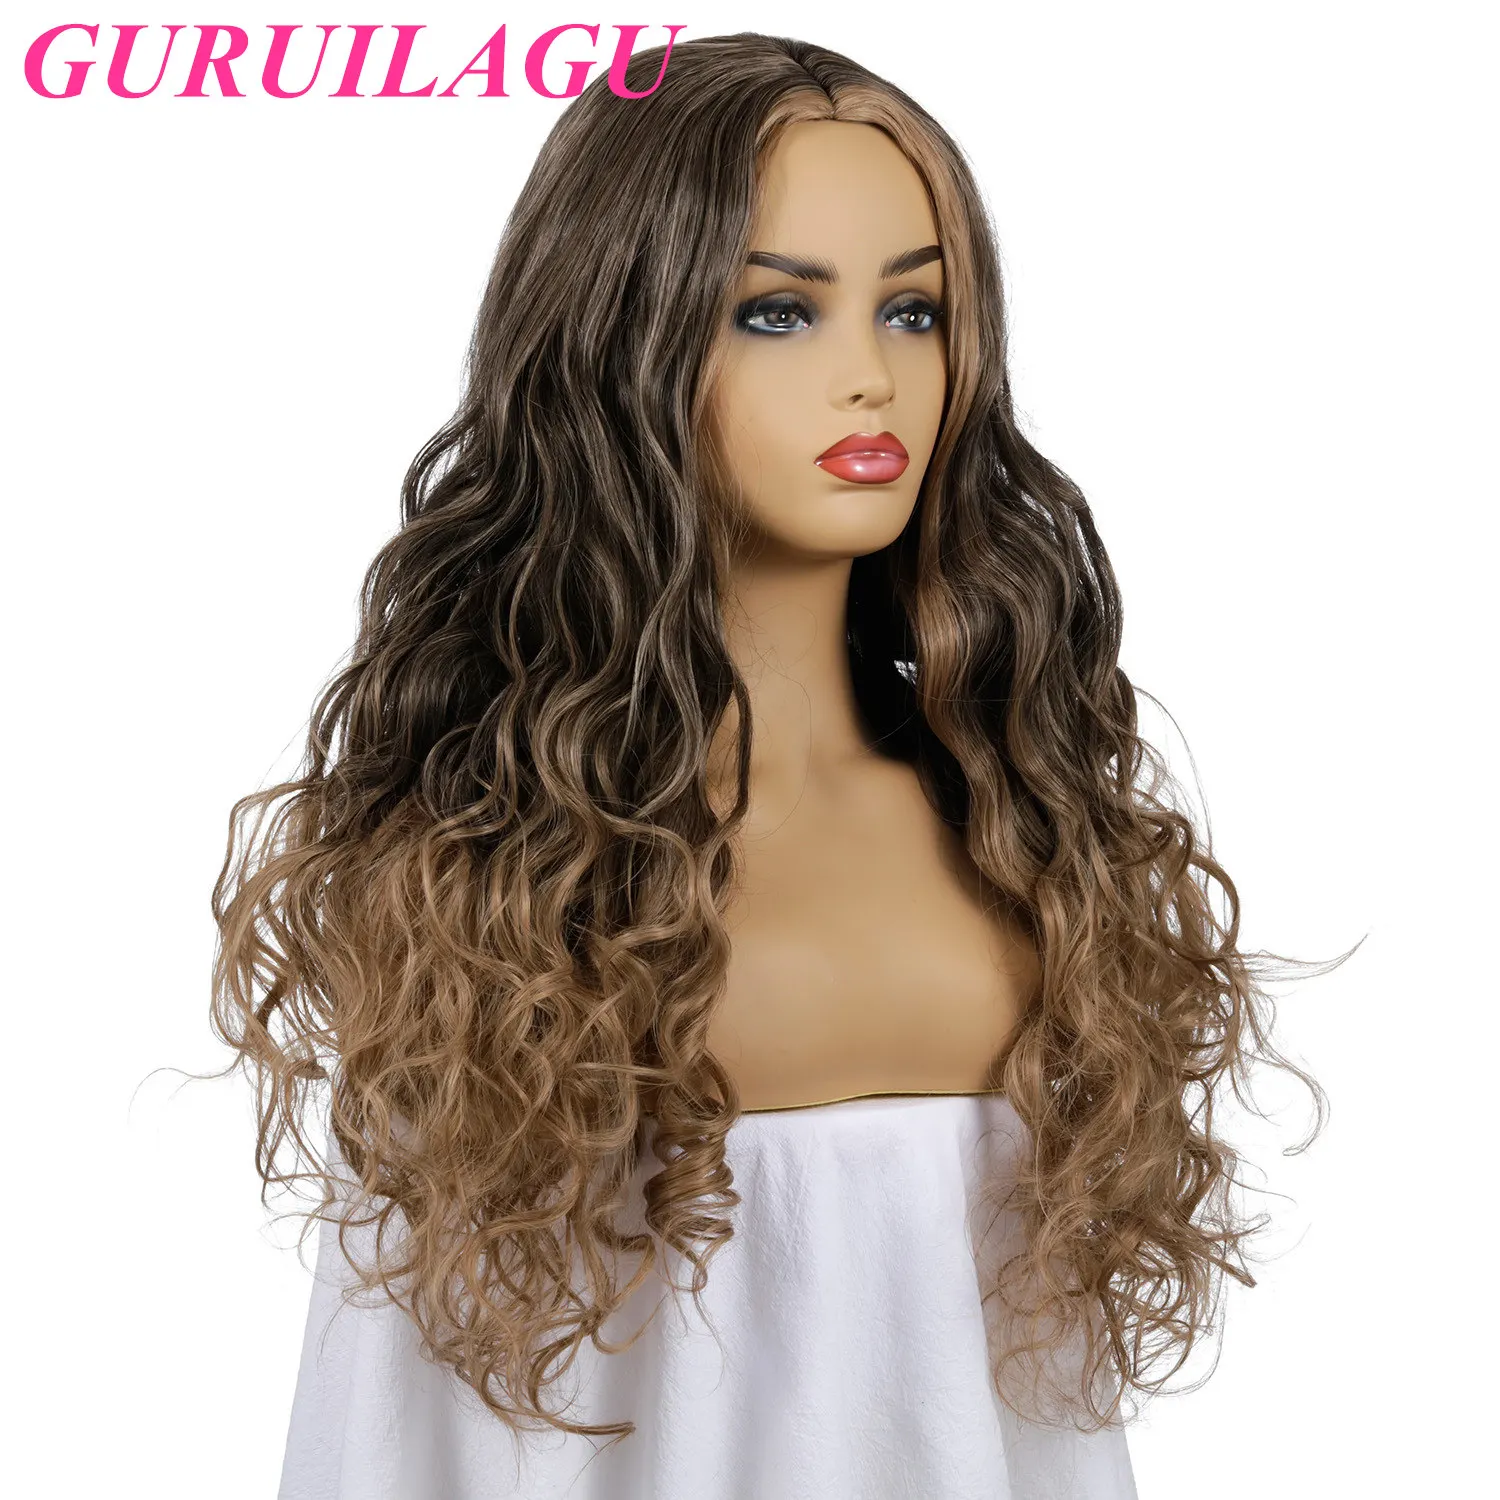 

GURUILAGU Synthetic Wigs For Women Long Wter Wave Ombre Brown Wigs for Black Women Middle Part Natural Wig Heat Resistant Fiber